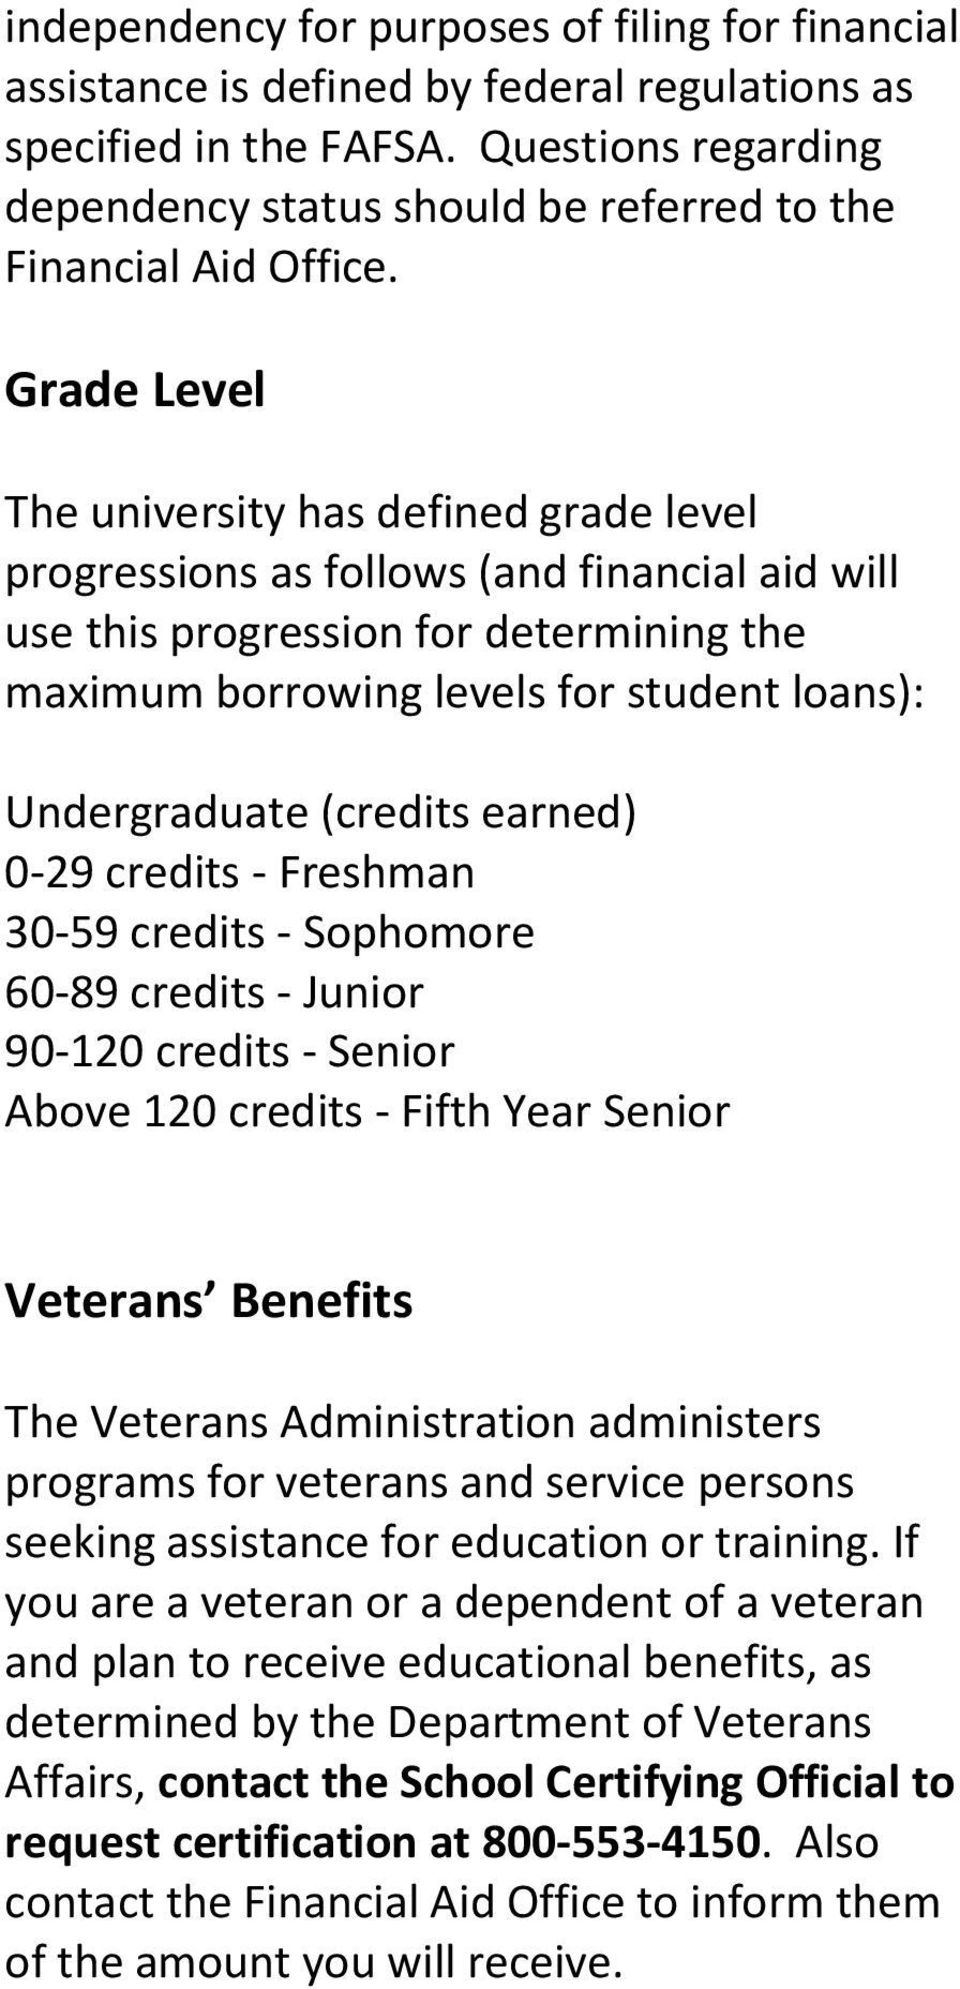 Grade Level The university has defined grade level progressions as follows (and financial aid will use this progression for determining the maximum borrowing levels for student loans): Undergraduate